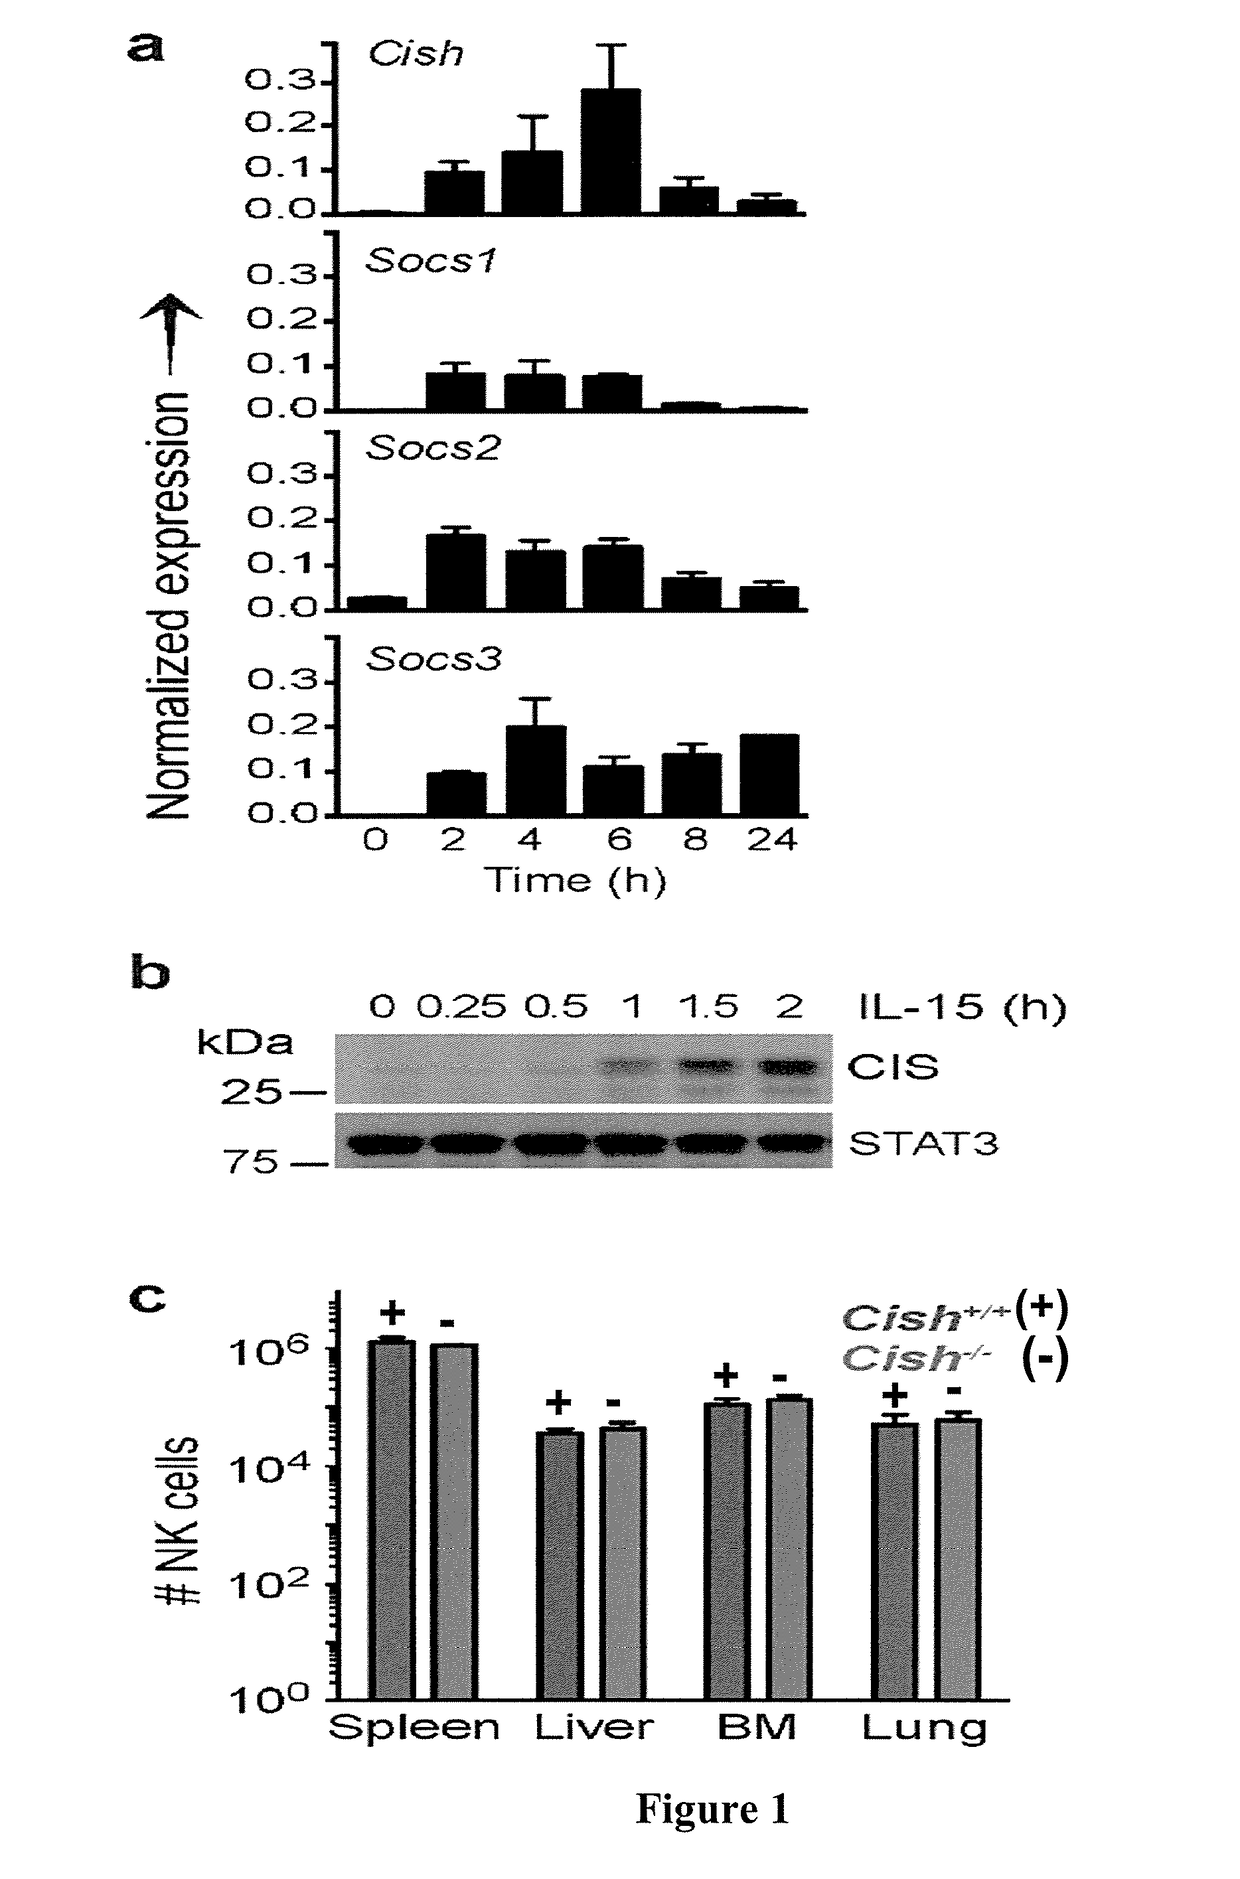 Inhibition of Cytokine-Induced SH2 Protein in NK Cells